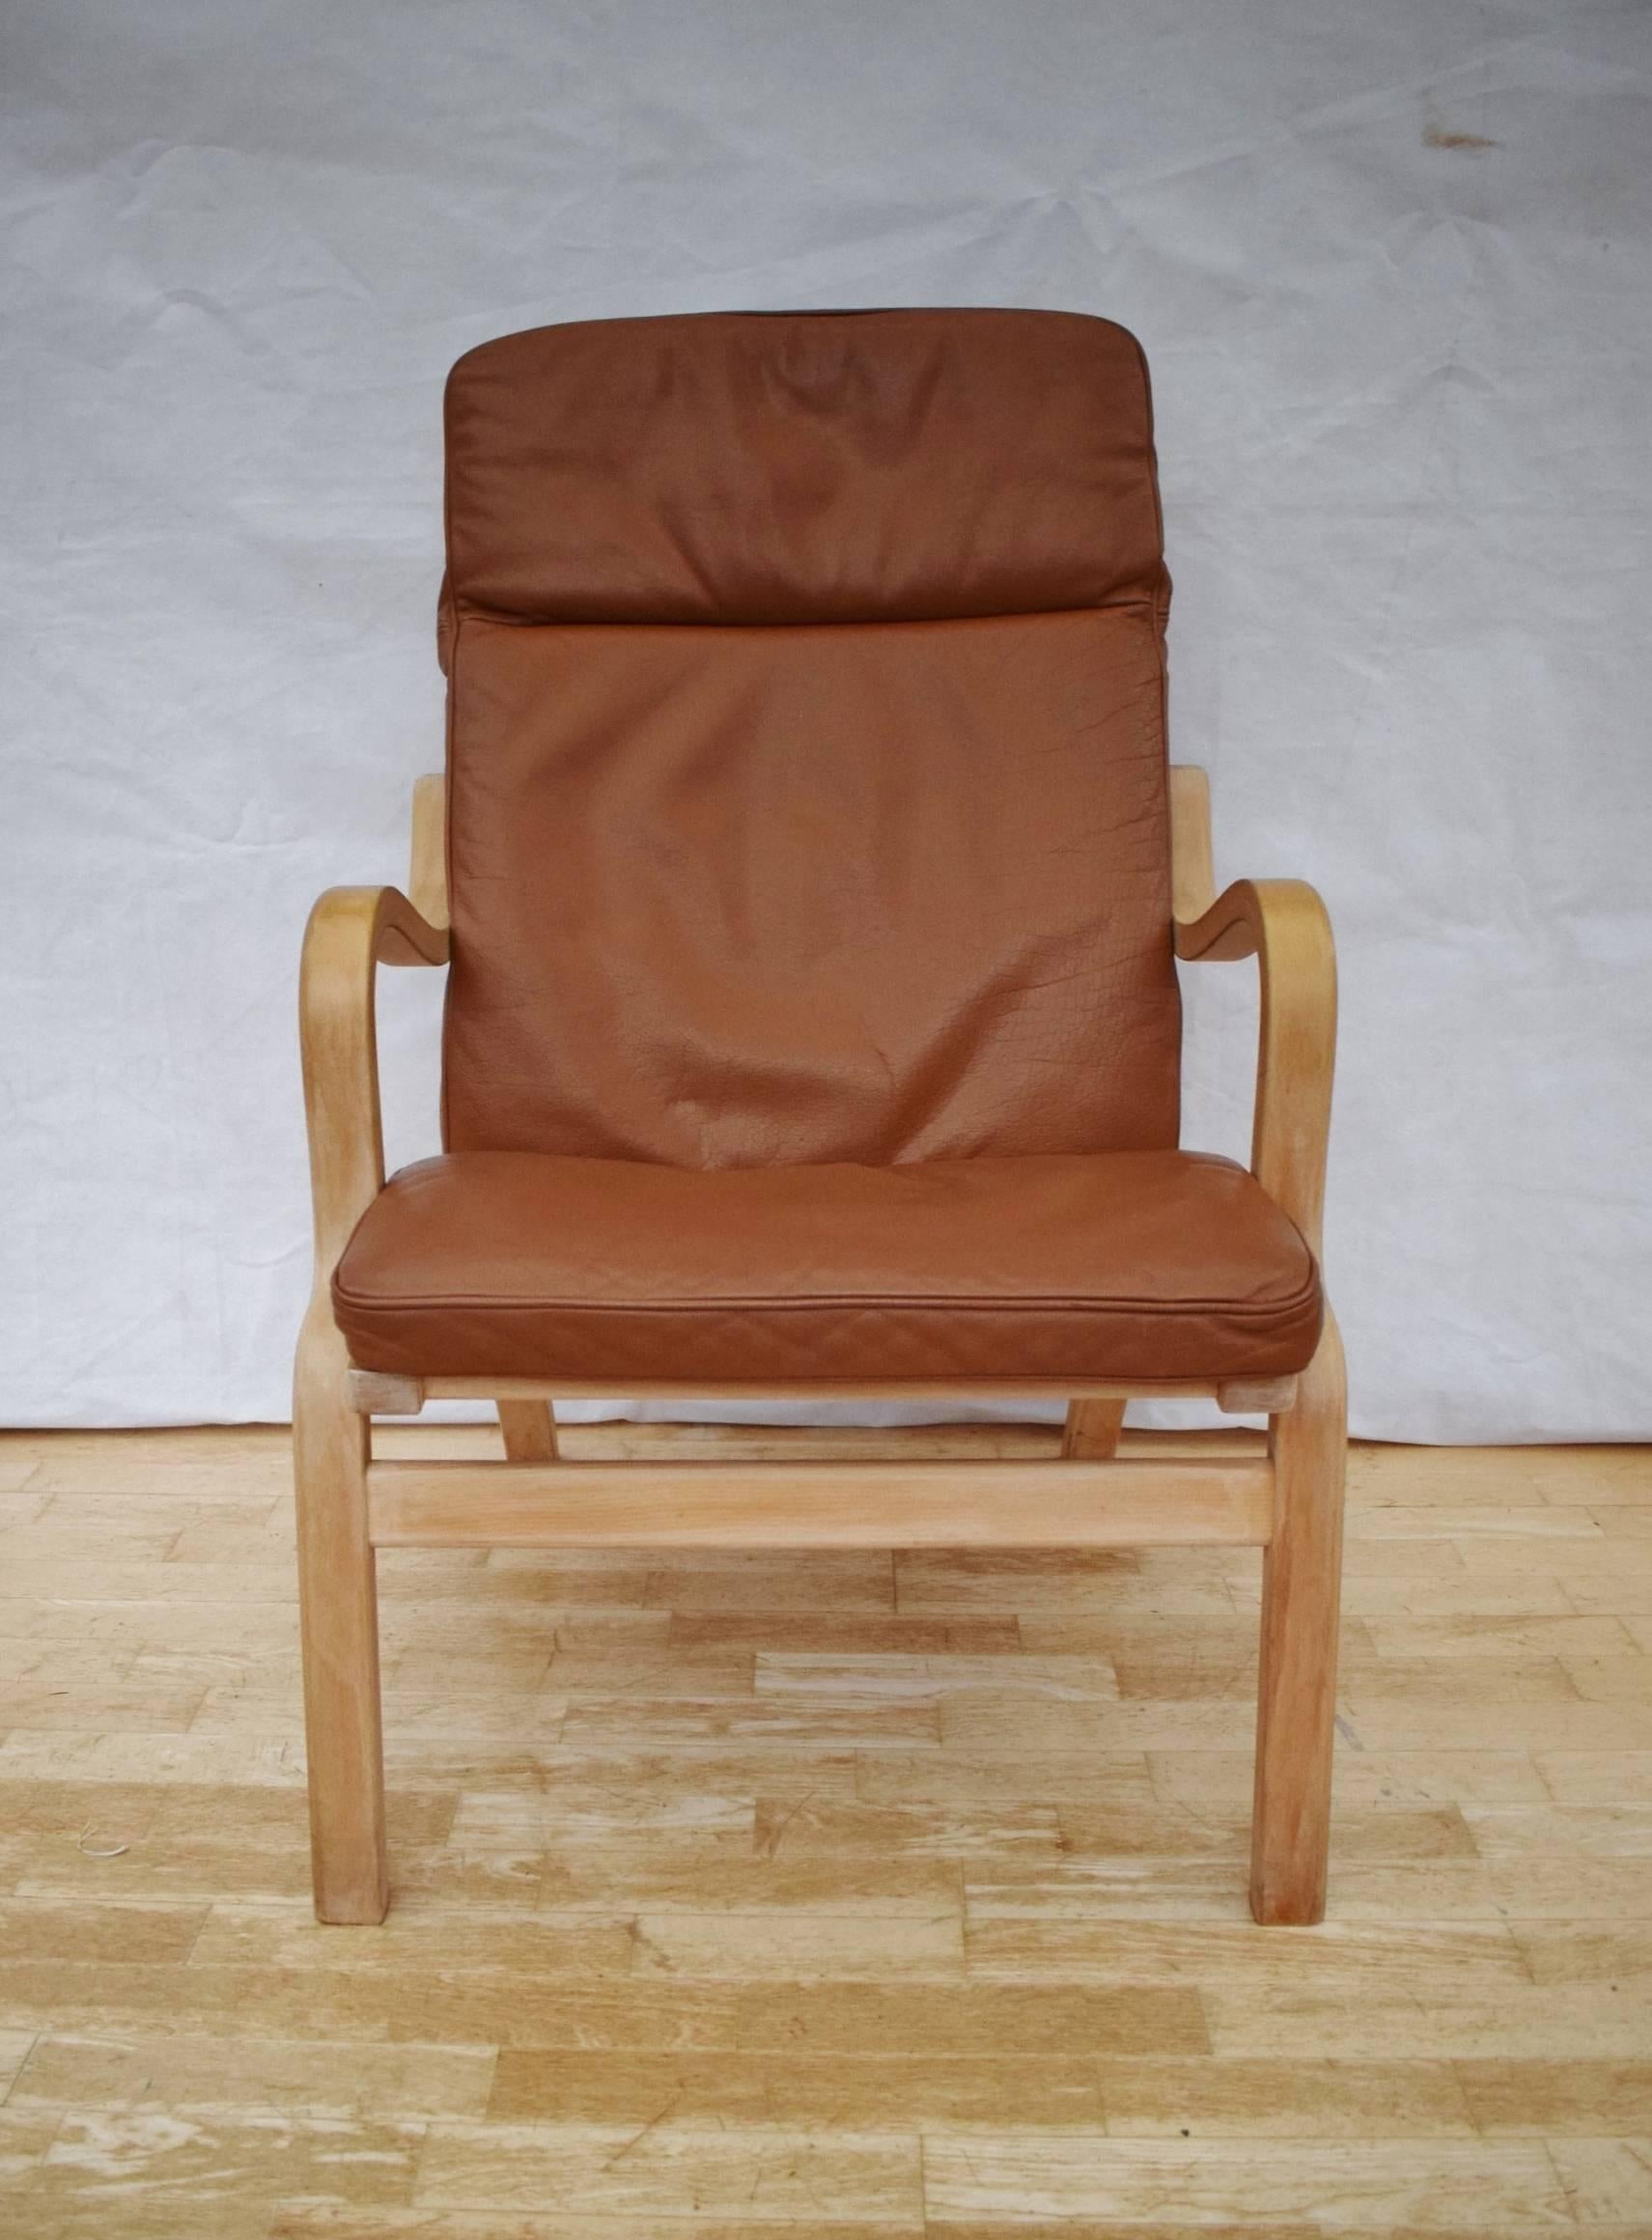 Designer: Danish design.

Manufacturer: Stouby.

Country: Denmark.

Date: 1960s.

Material: Bentwood beech and tan leather.

Maximum dimensions: 63cm wide, 75cm deep, 98cm tall.
Seat height to the front is 43cm.
​Footstool 54cm wide,